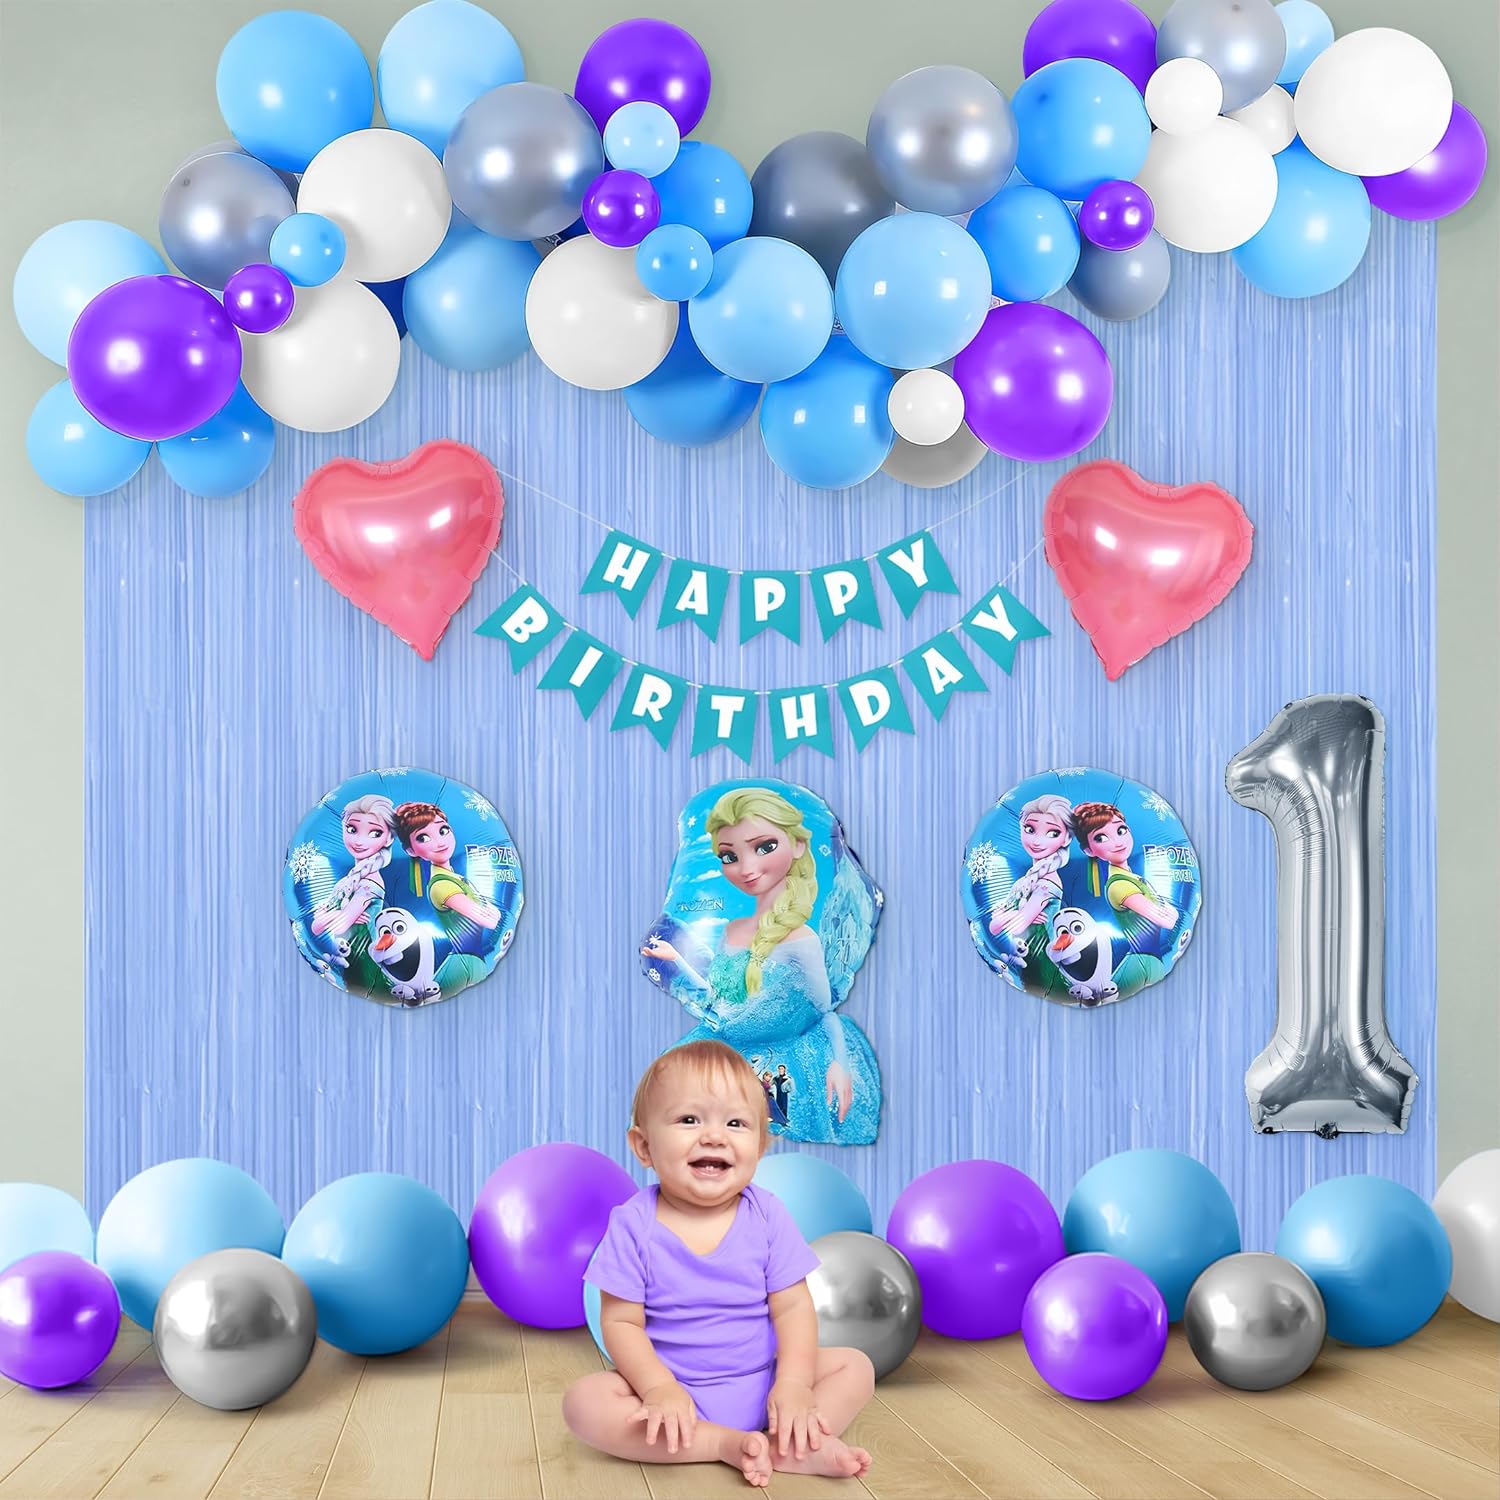 Frozen-Inspired Decor for a 1st Birthday